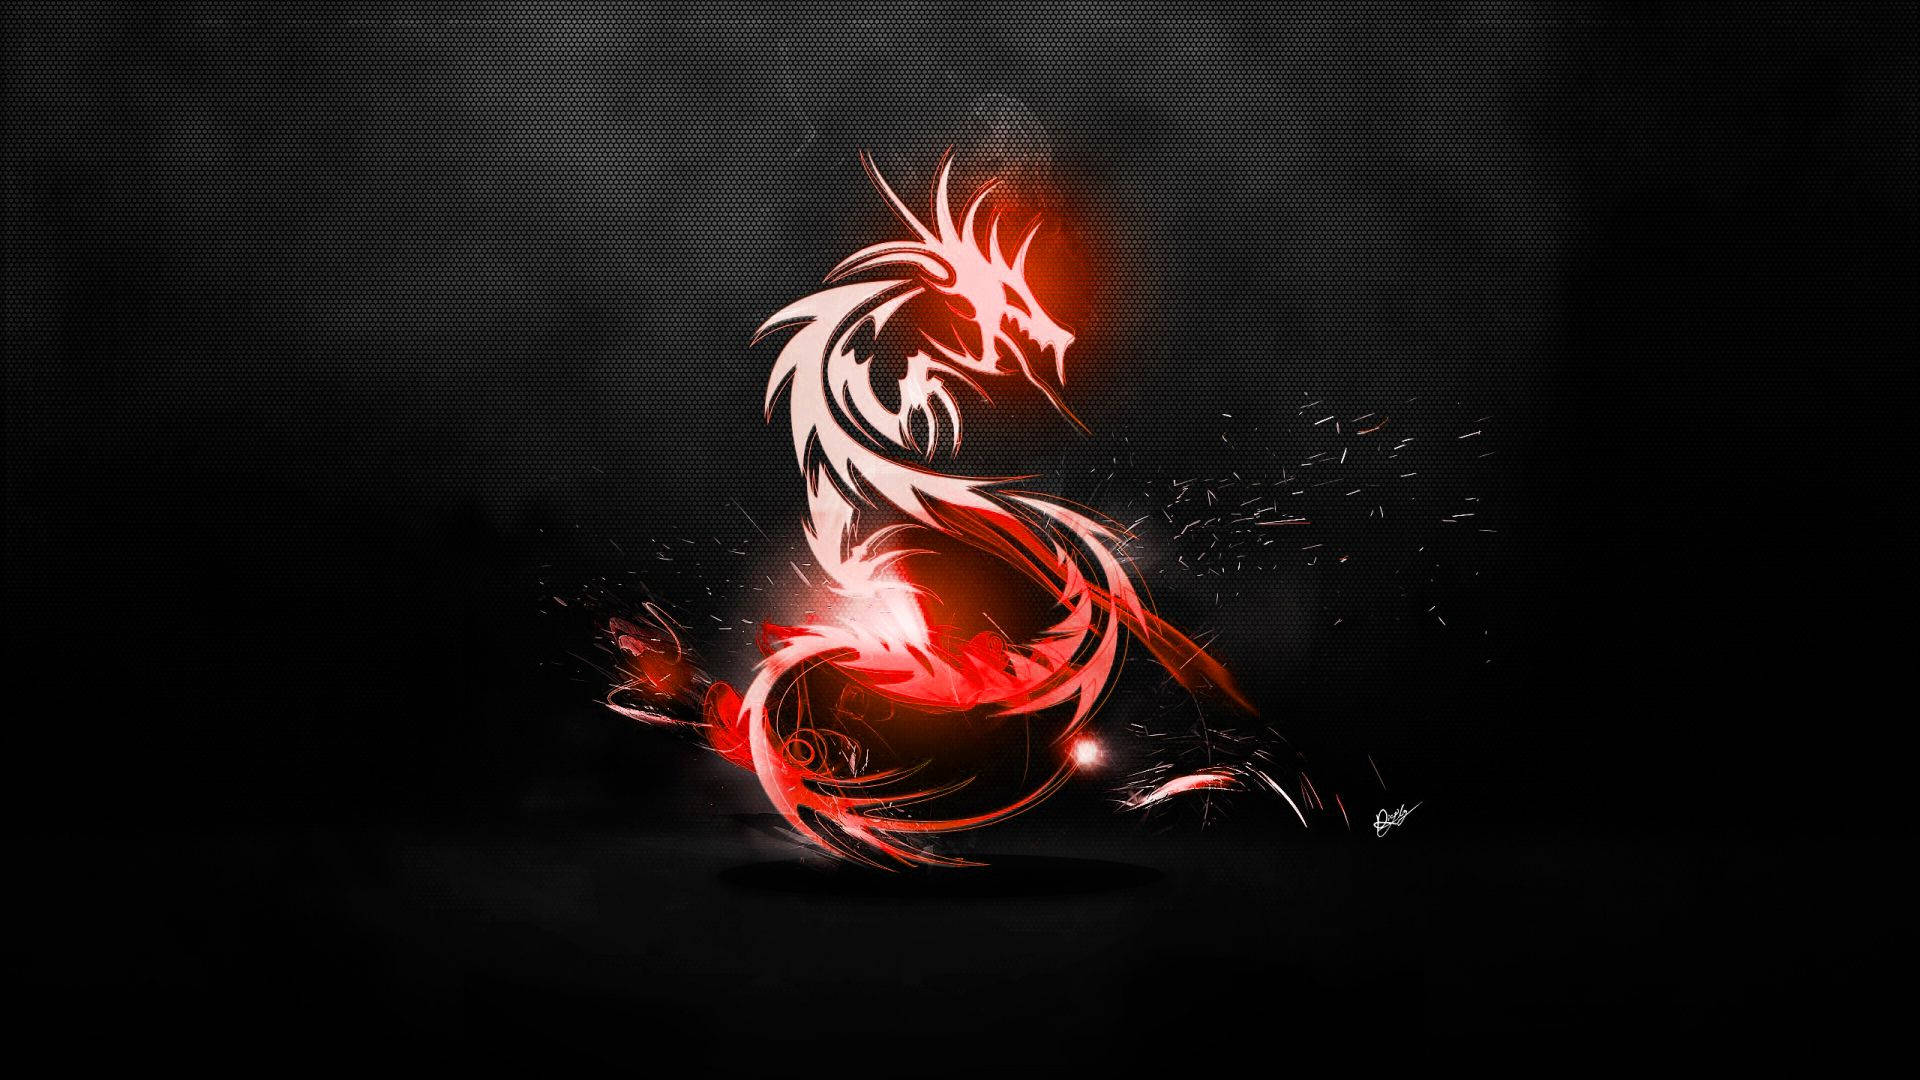 A mesmerizing red and black dragon art Wallpaper